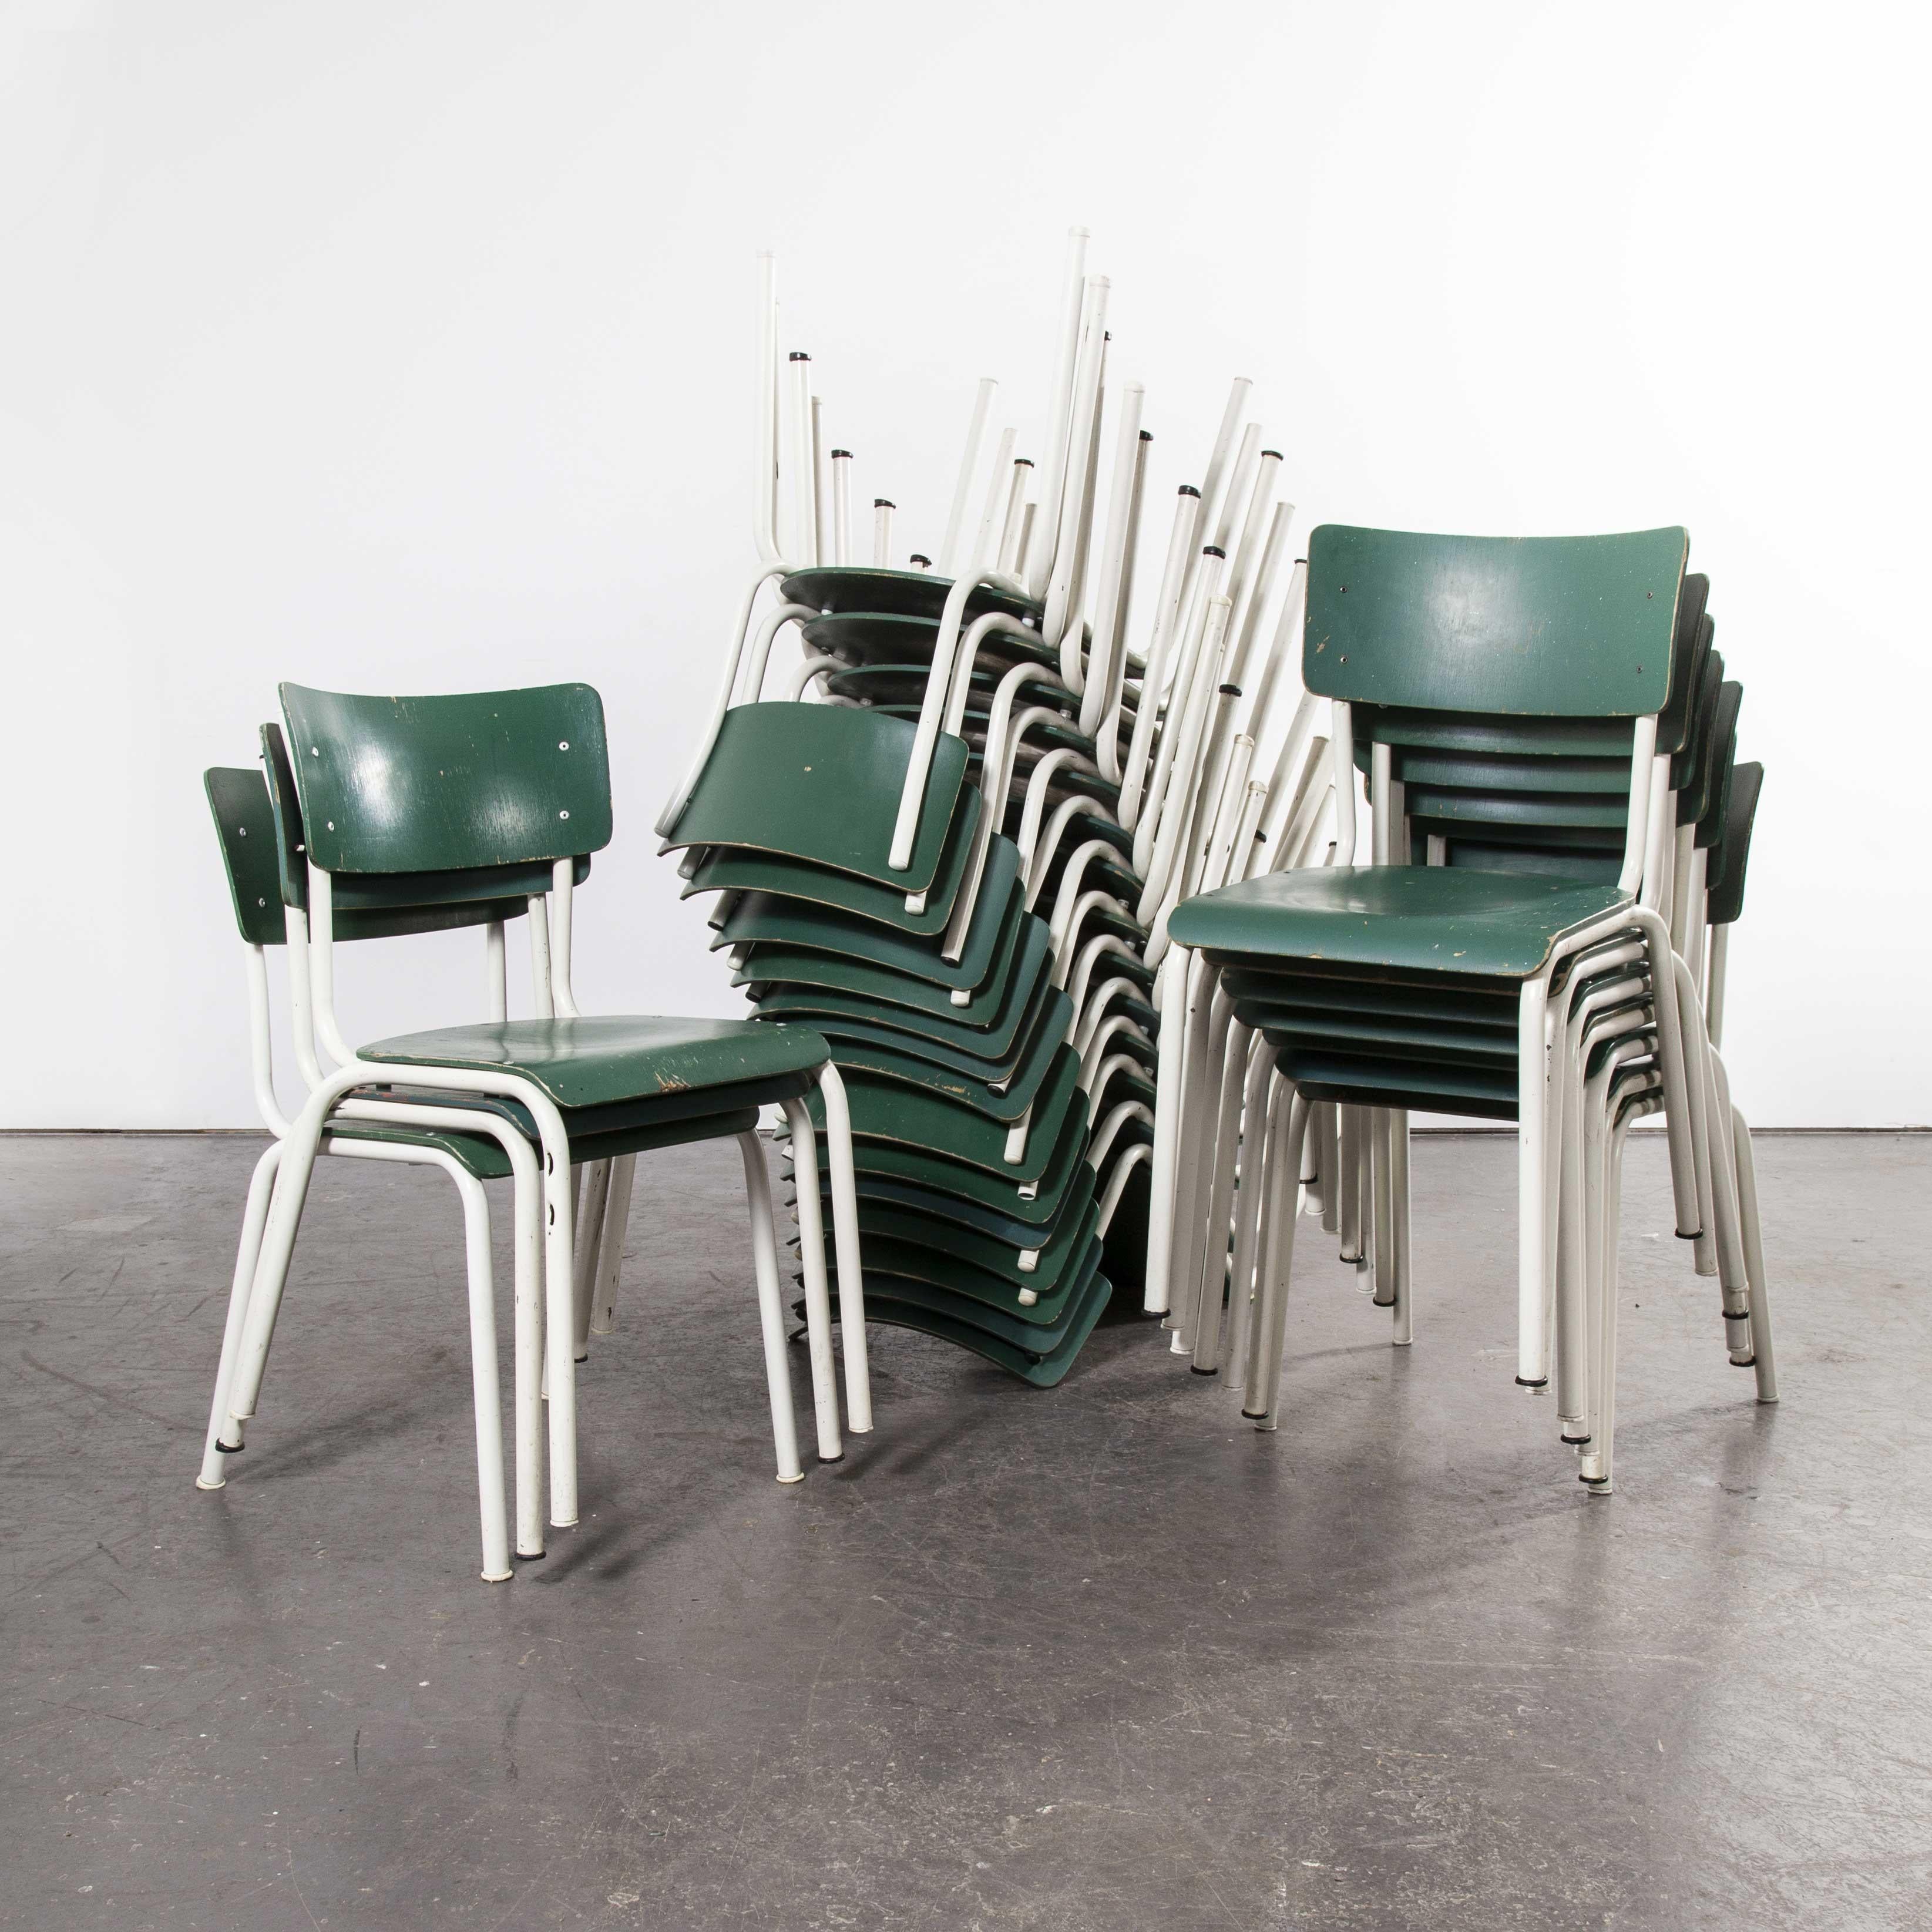 1970's Thonet Stacking Dining Chairs For The German Army - Green - Good Qty For Sale 12